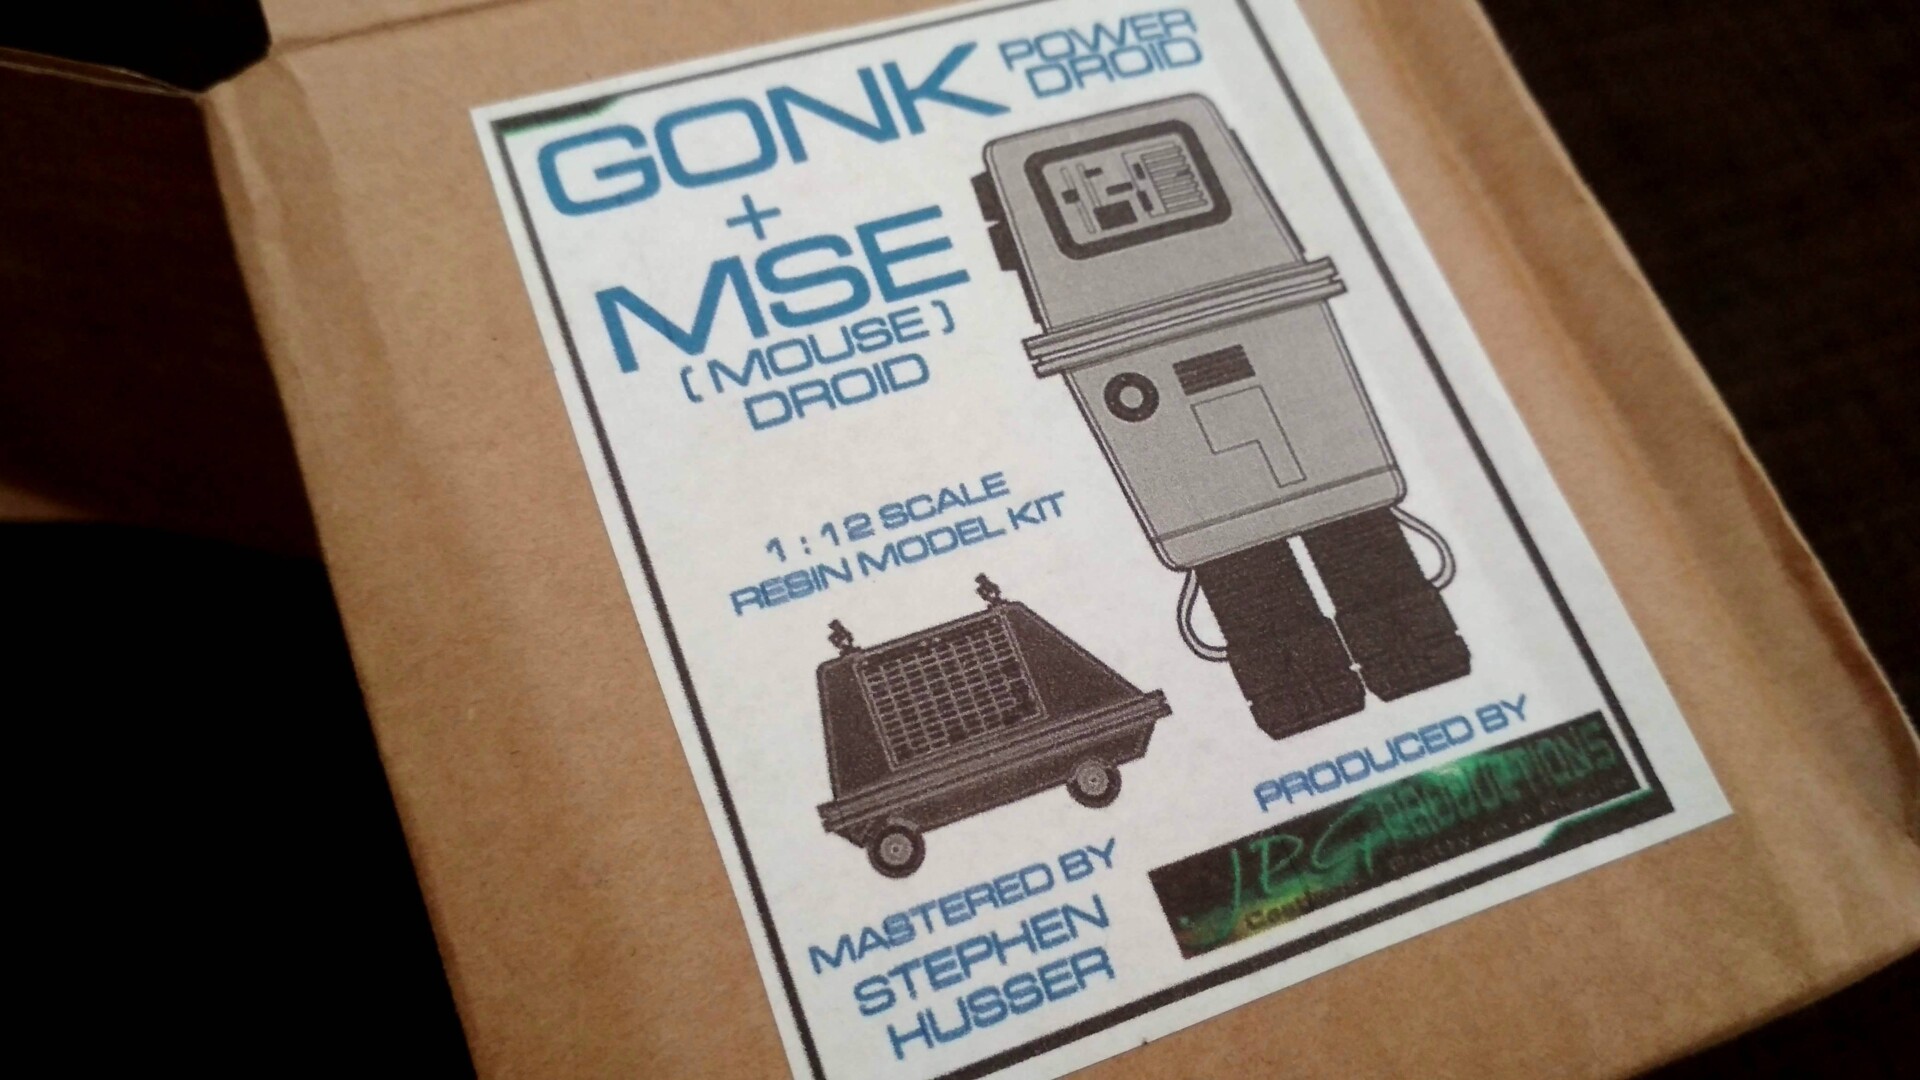 Gonk power droid + MSE Mouse Droid / 1:12 / JPG Productions